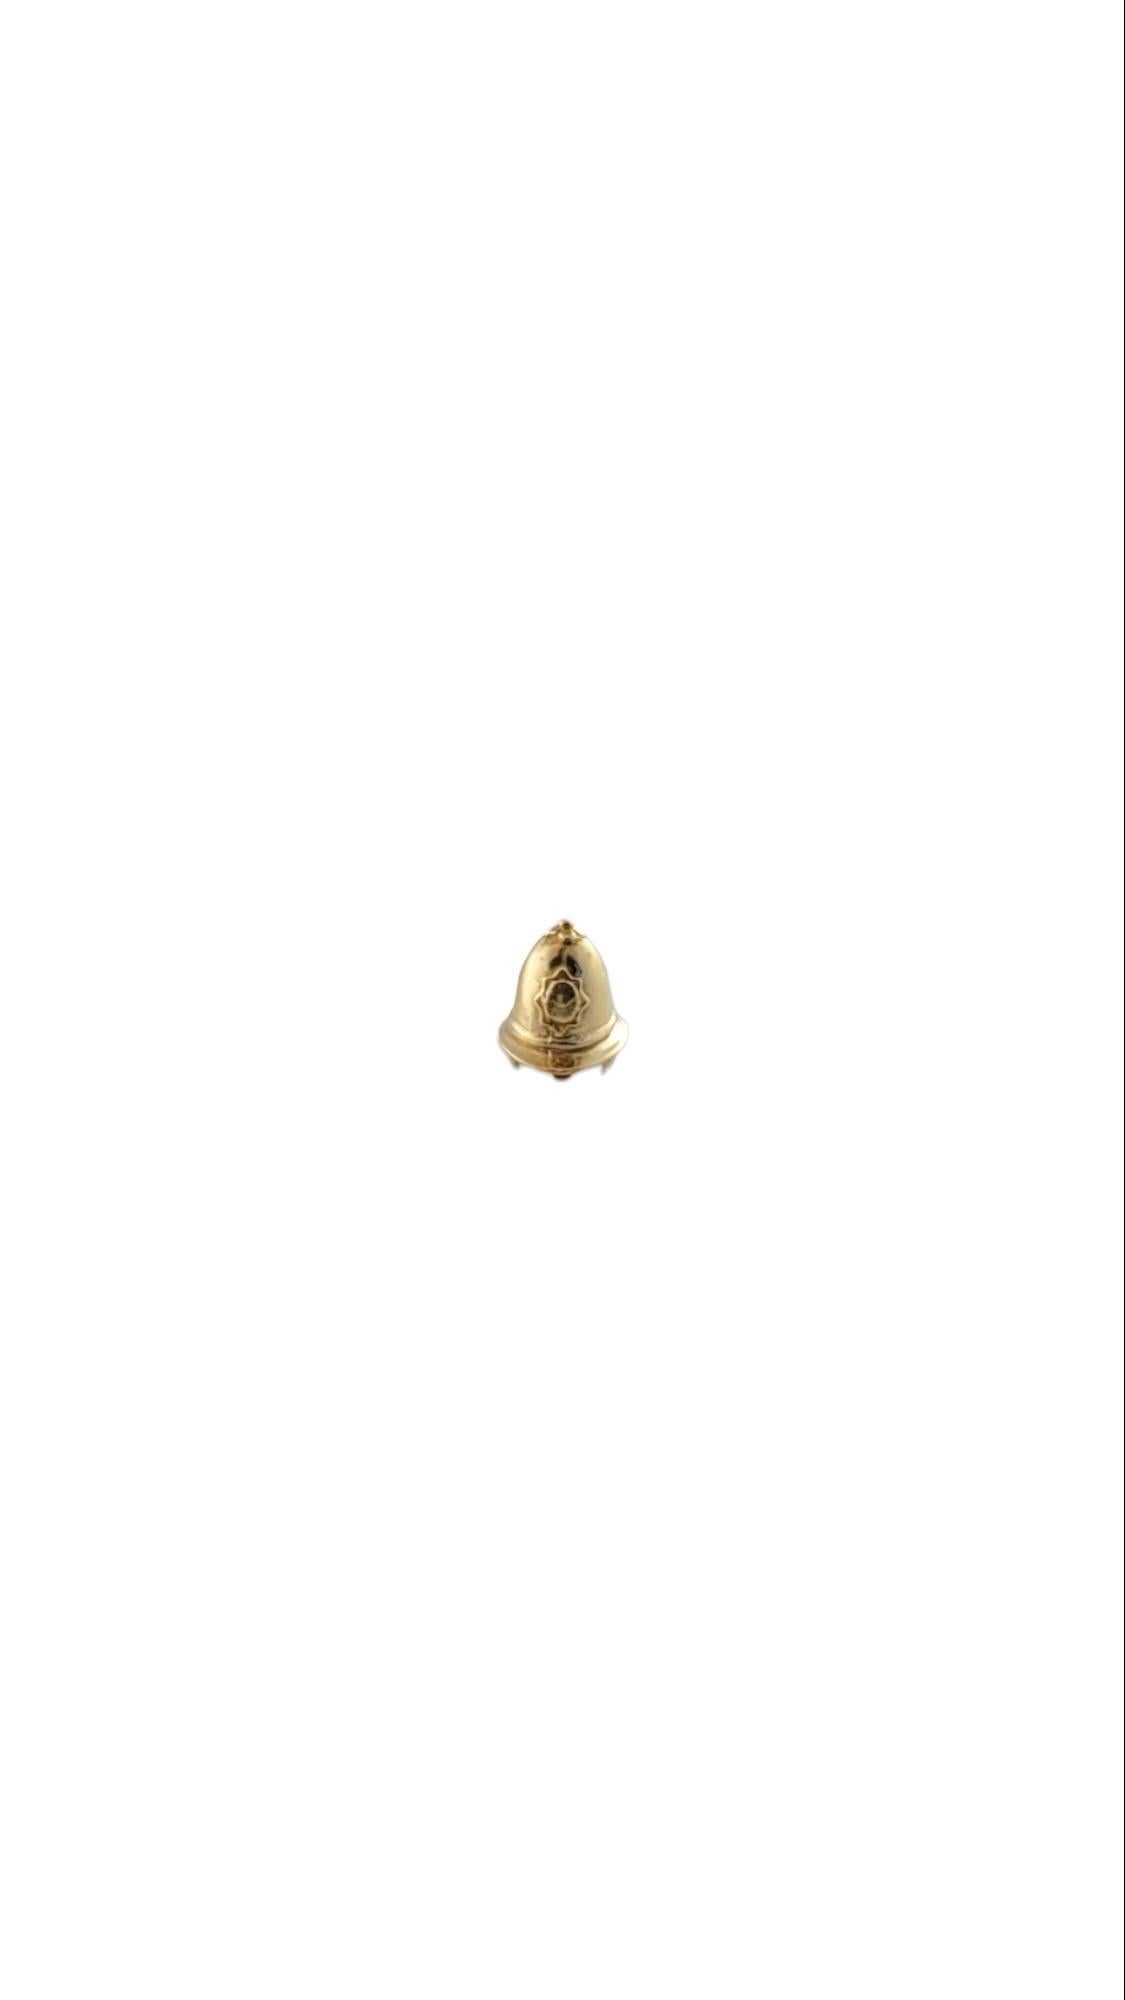 Vintage 14K Yellow Gold Fireman's Helmet Charm- 

This fireman's helmet charm is crafted in meticulously detailed 14K yellow gold. 

Tested 14K Yellow Gold 

Size: 17.9mm X 12.3mm 

Weight: 4.3g X 2.7dwt

Very good condition, professionally